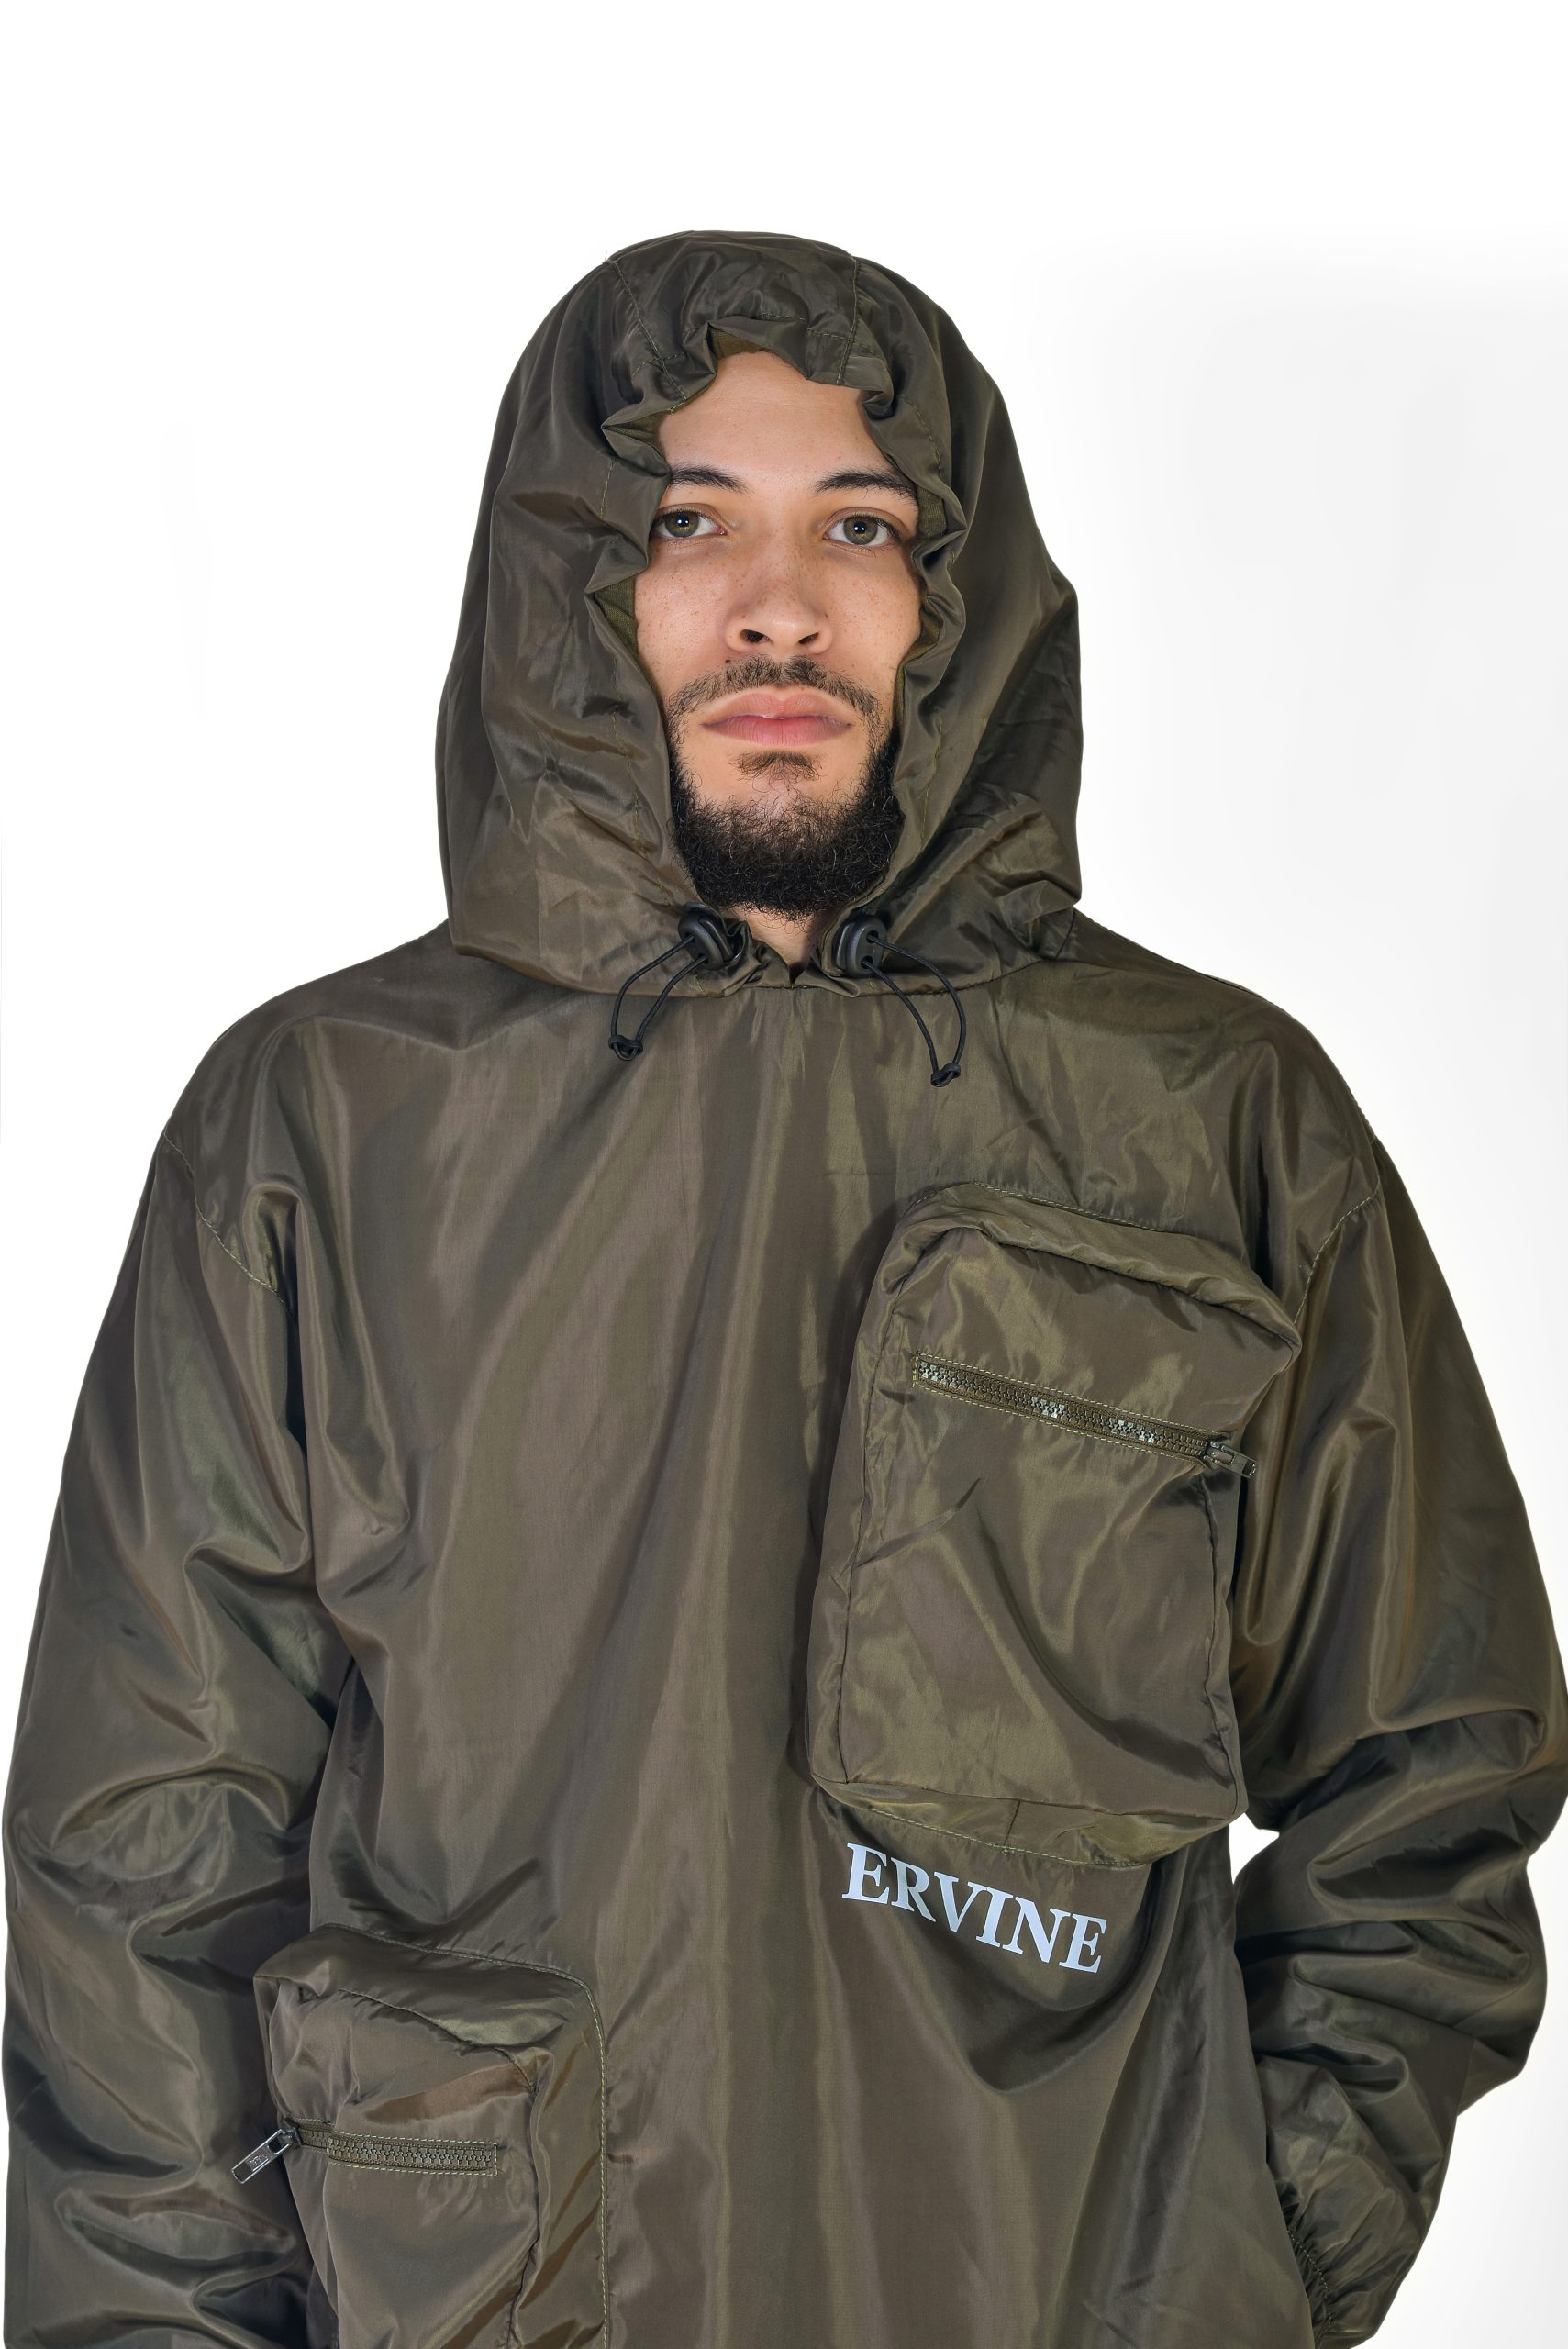 Man ERVINE wearing olive green windbreaker pullover jacket with a reflective logo and cargo pockets